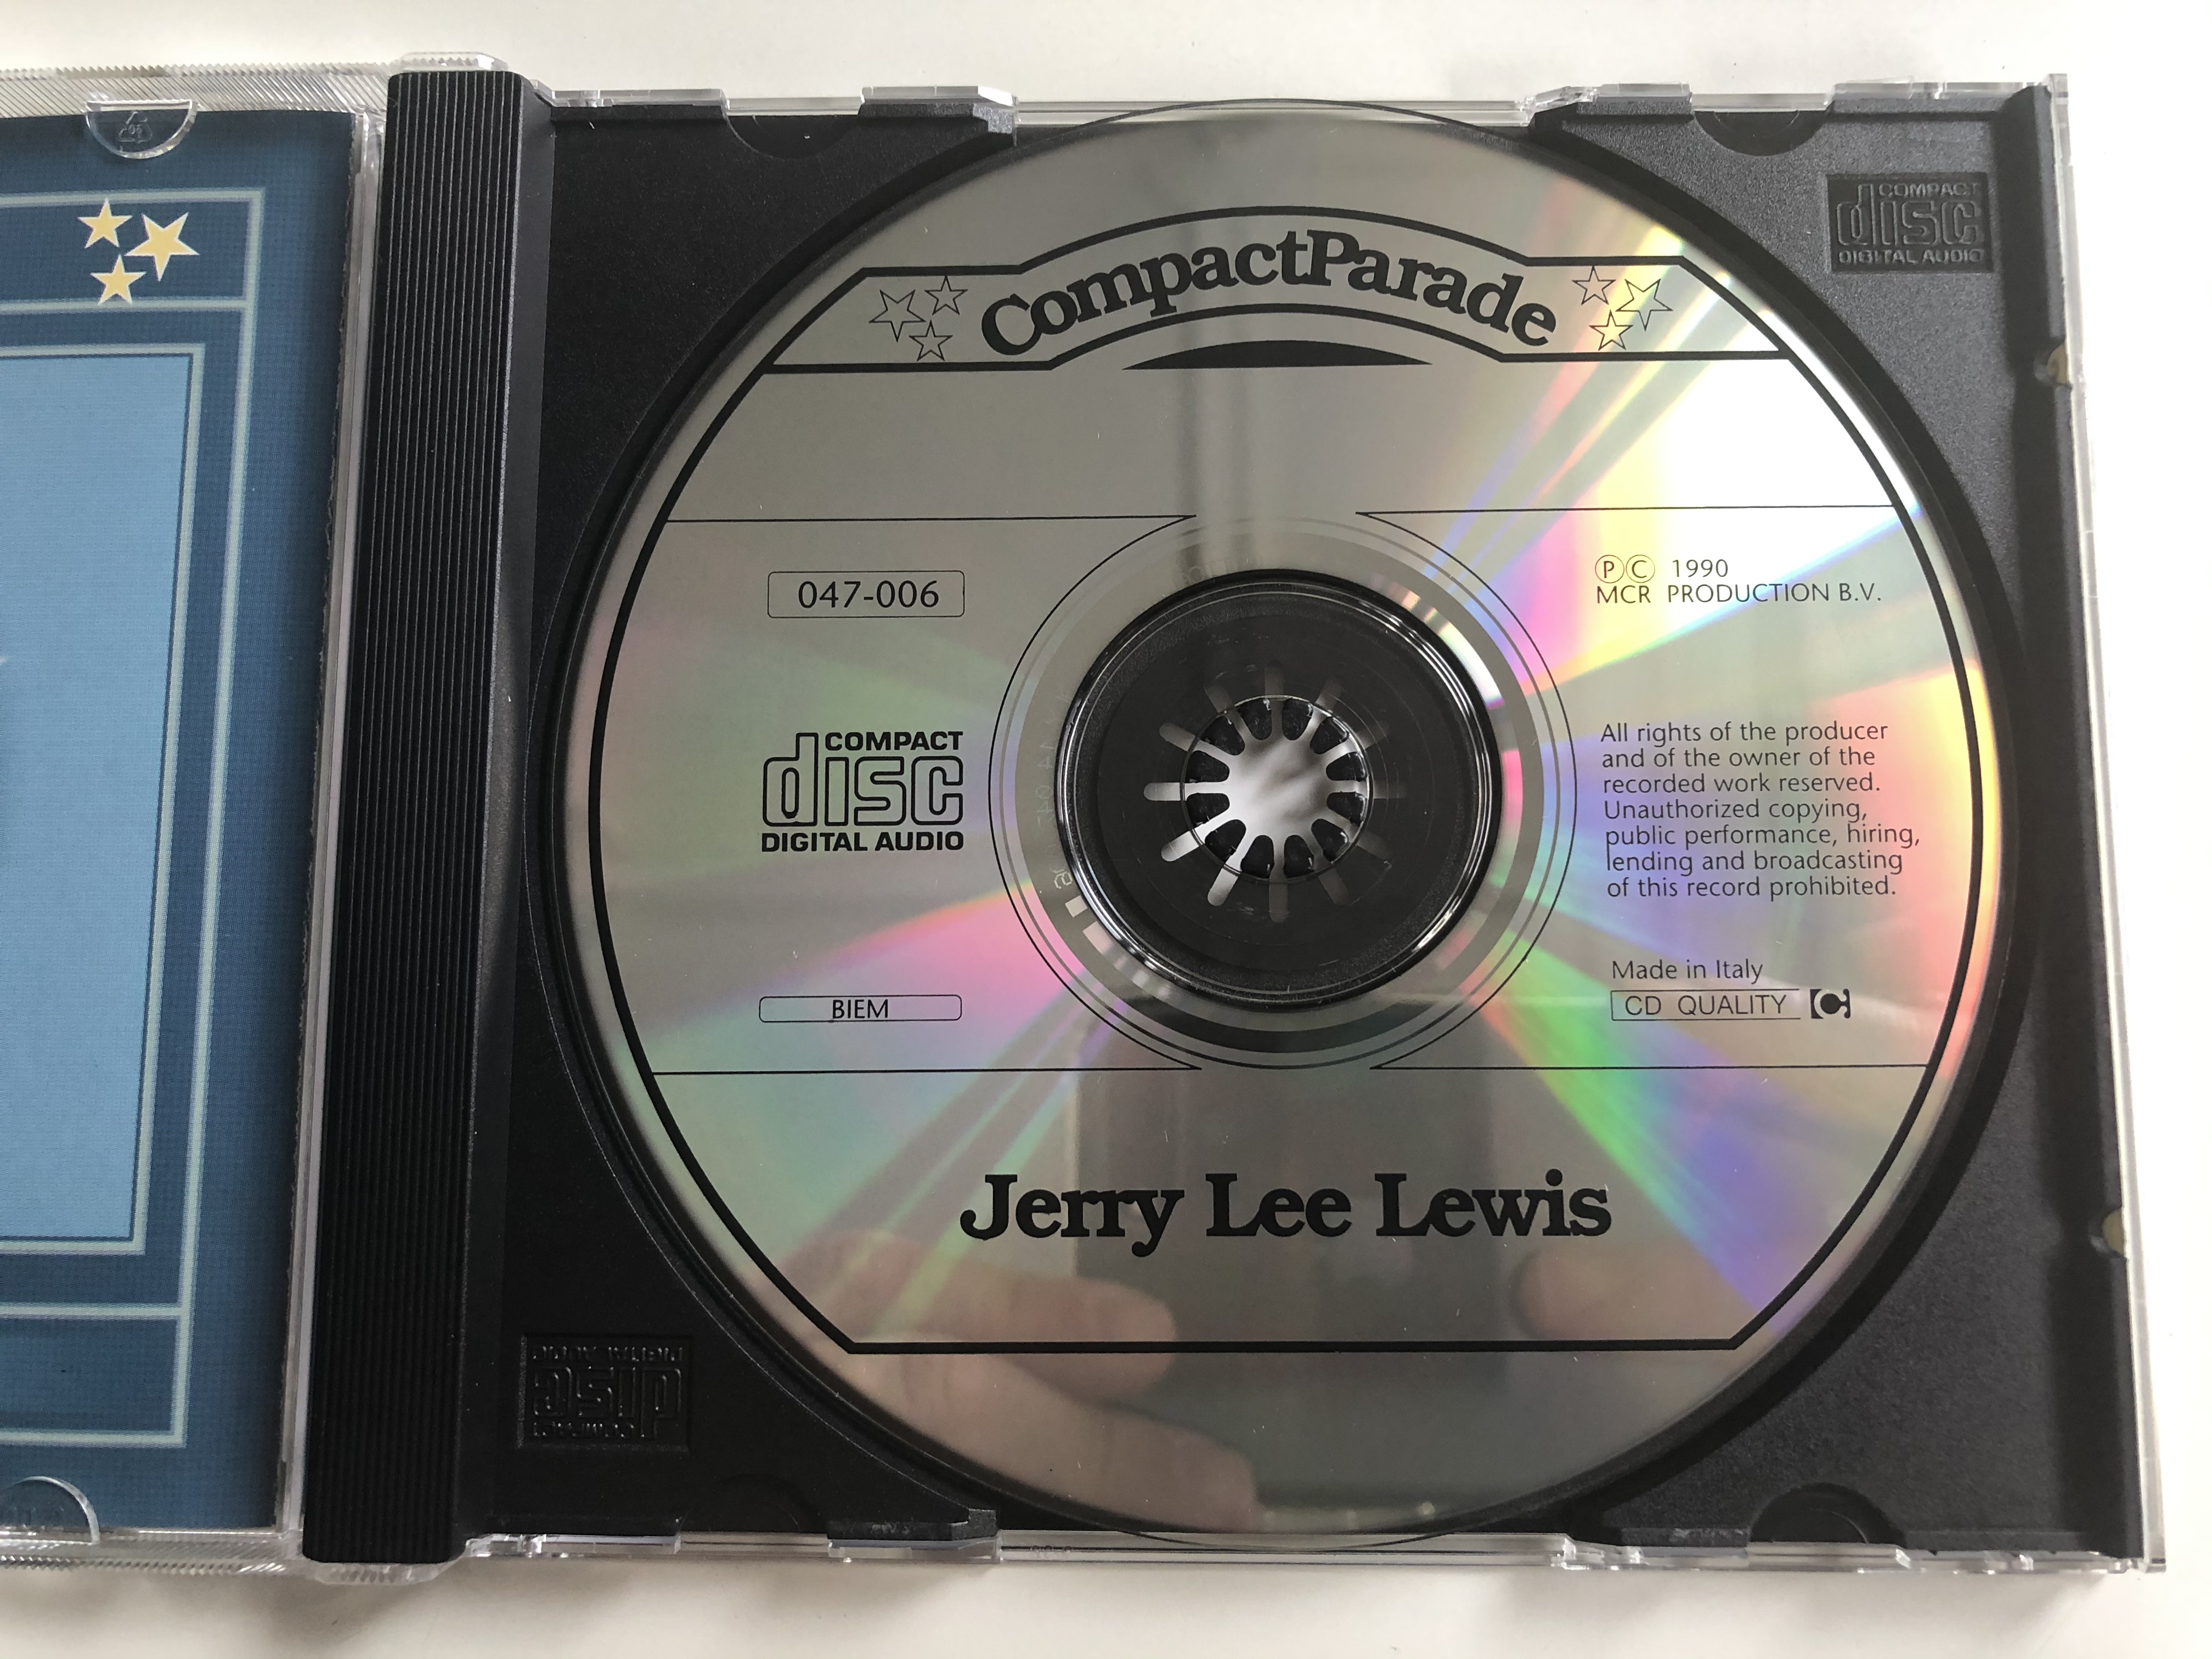 compact-parade-jerry-lee-lewis-m.c.r.-productions-b.v.-audio-cd-1990-047-006-3-.jpg